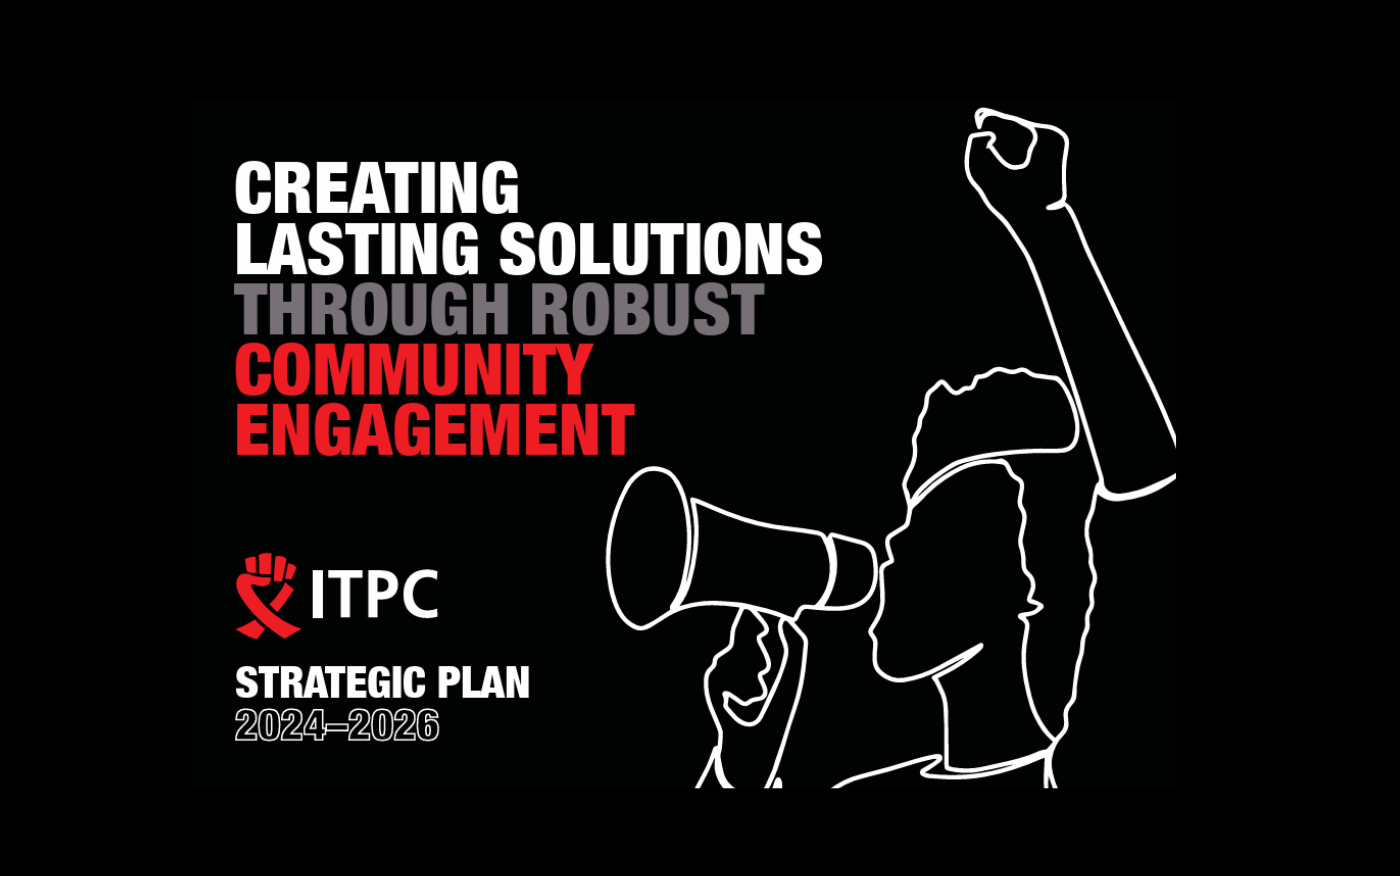 ITPC launches new strategic plan for 2024-2026